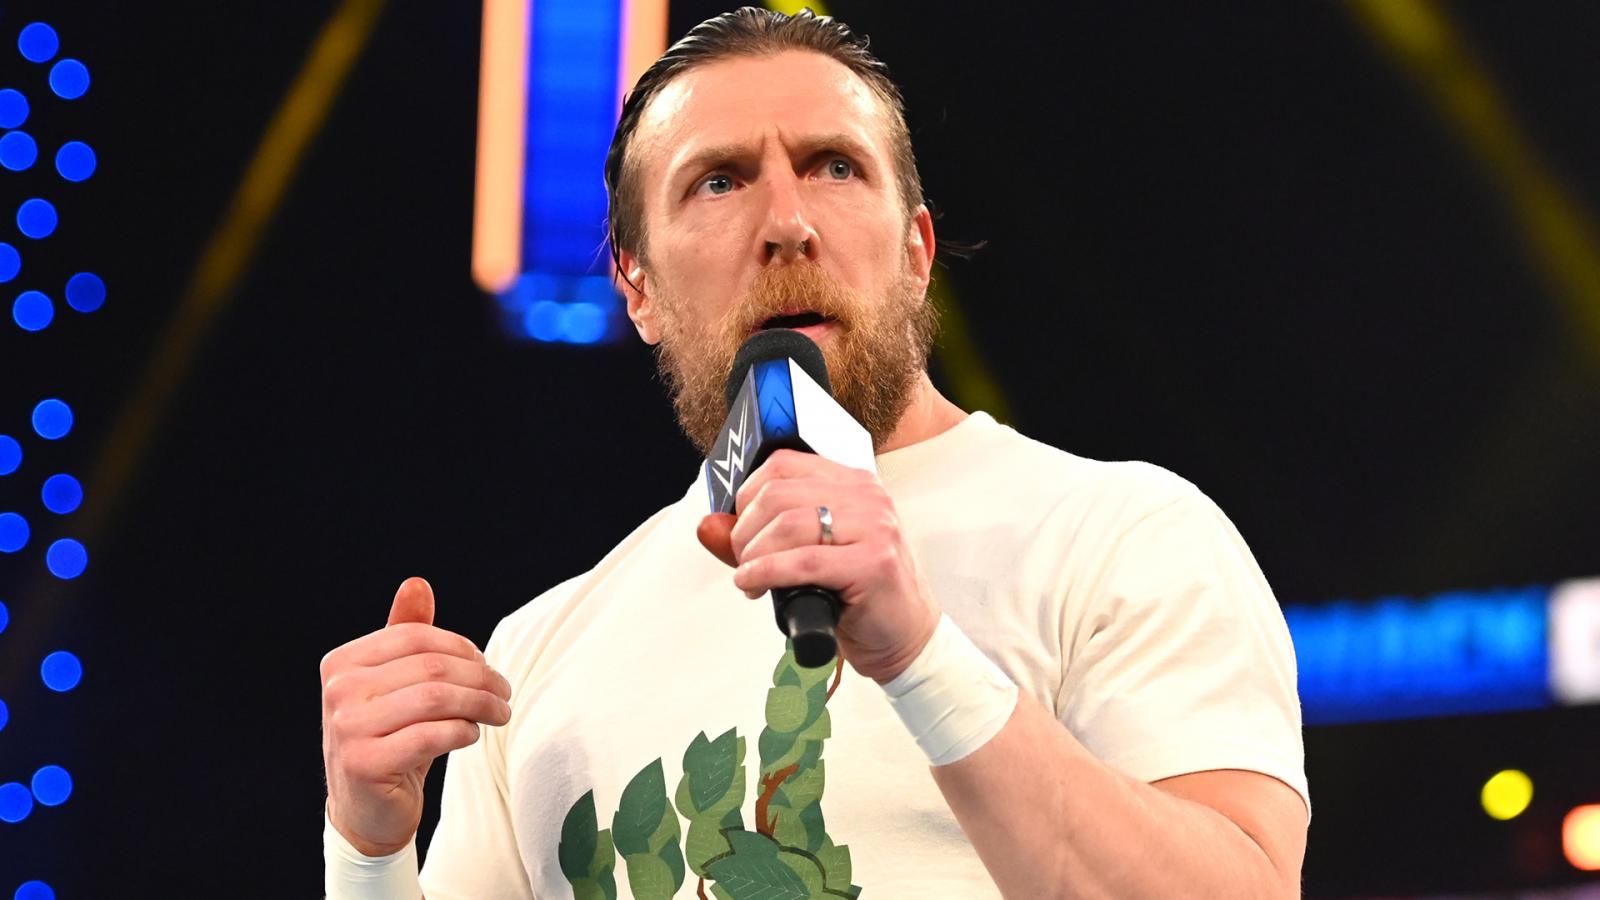 Wwe Daniel Bryan Status Update Money In The Bank Match Producers Sep 17th Smackdown Update